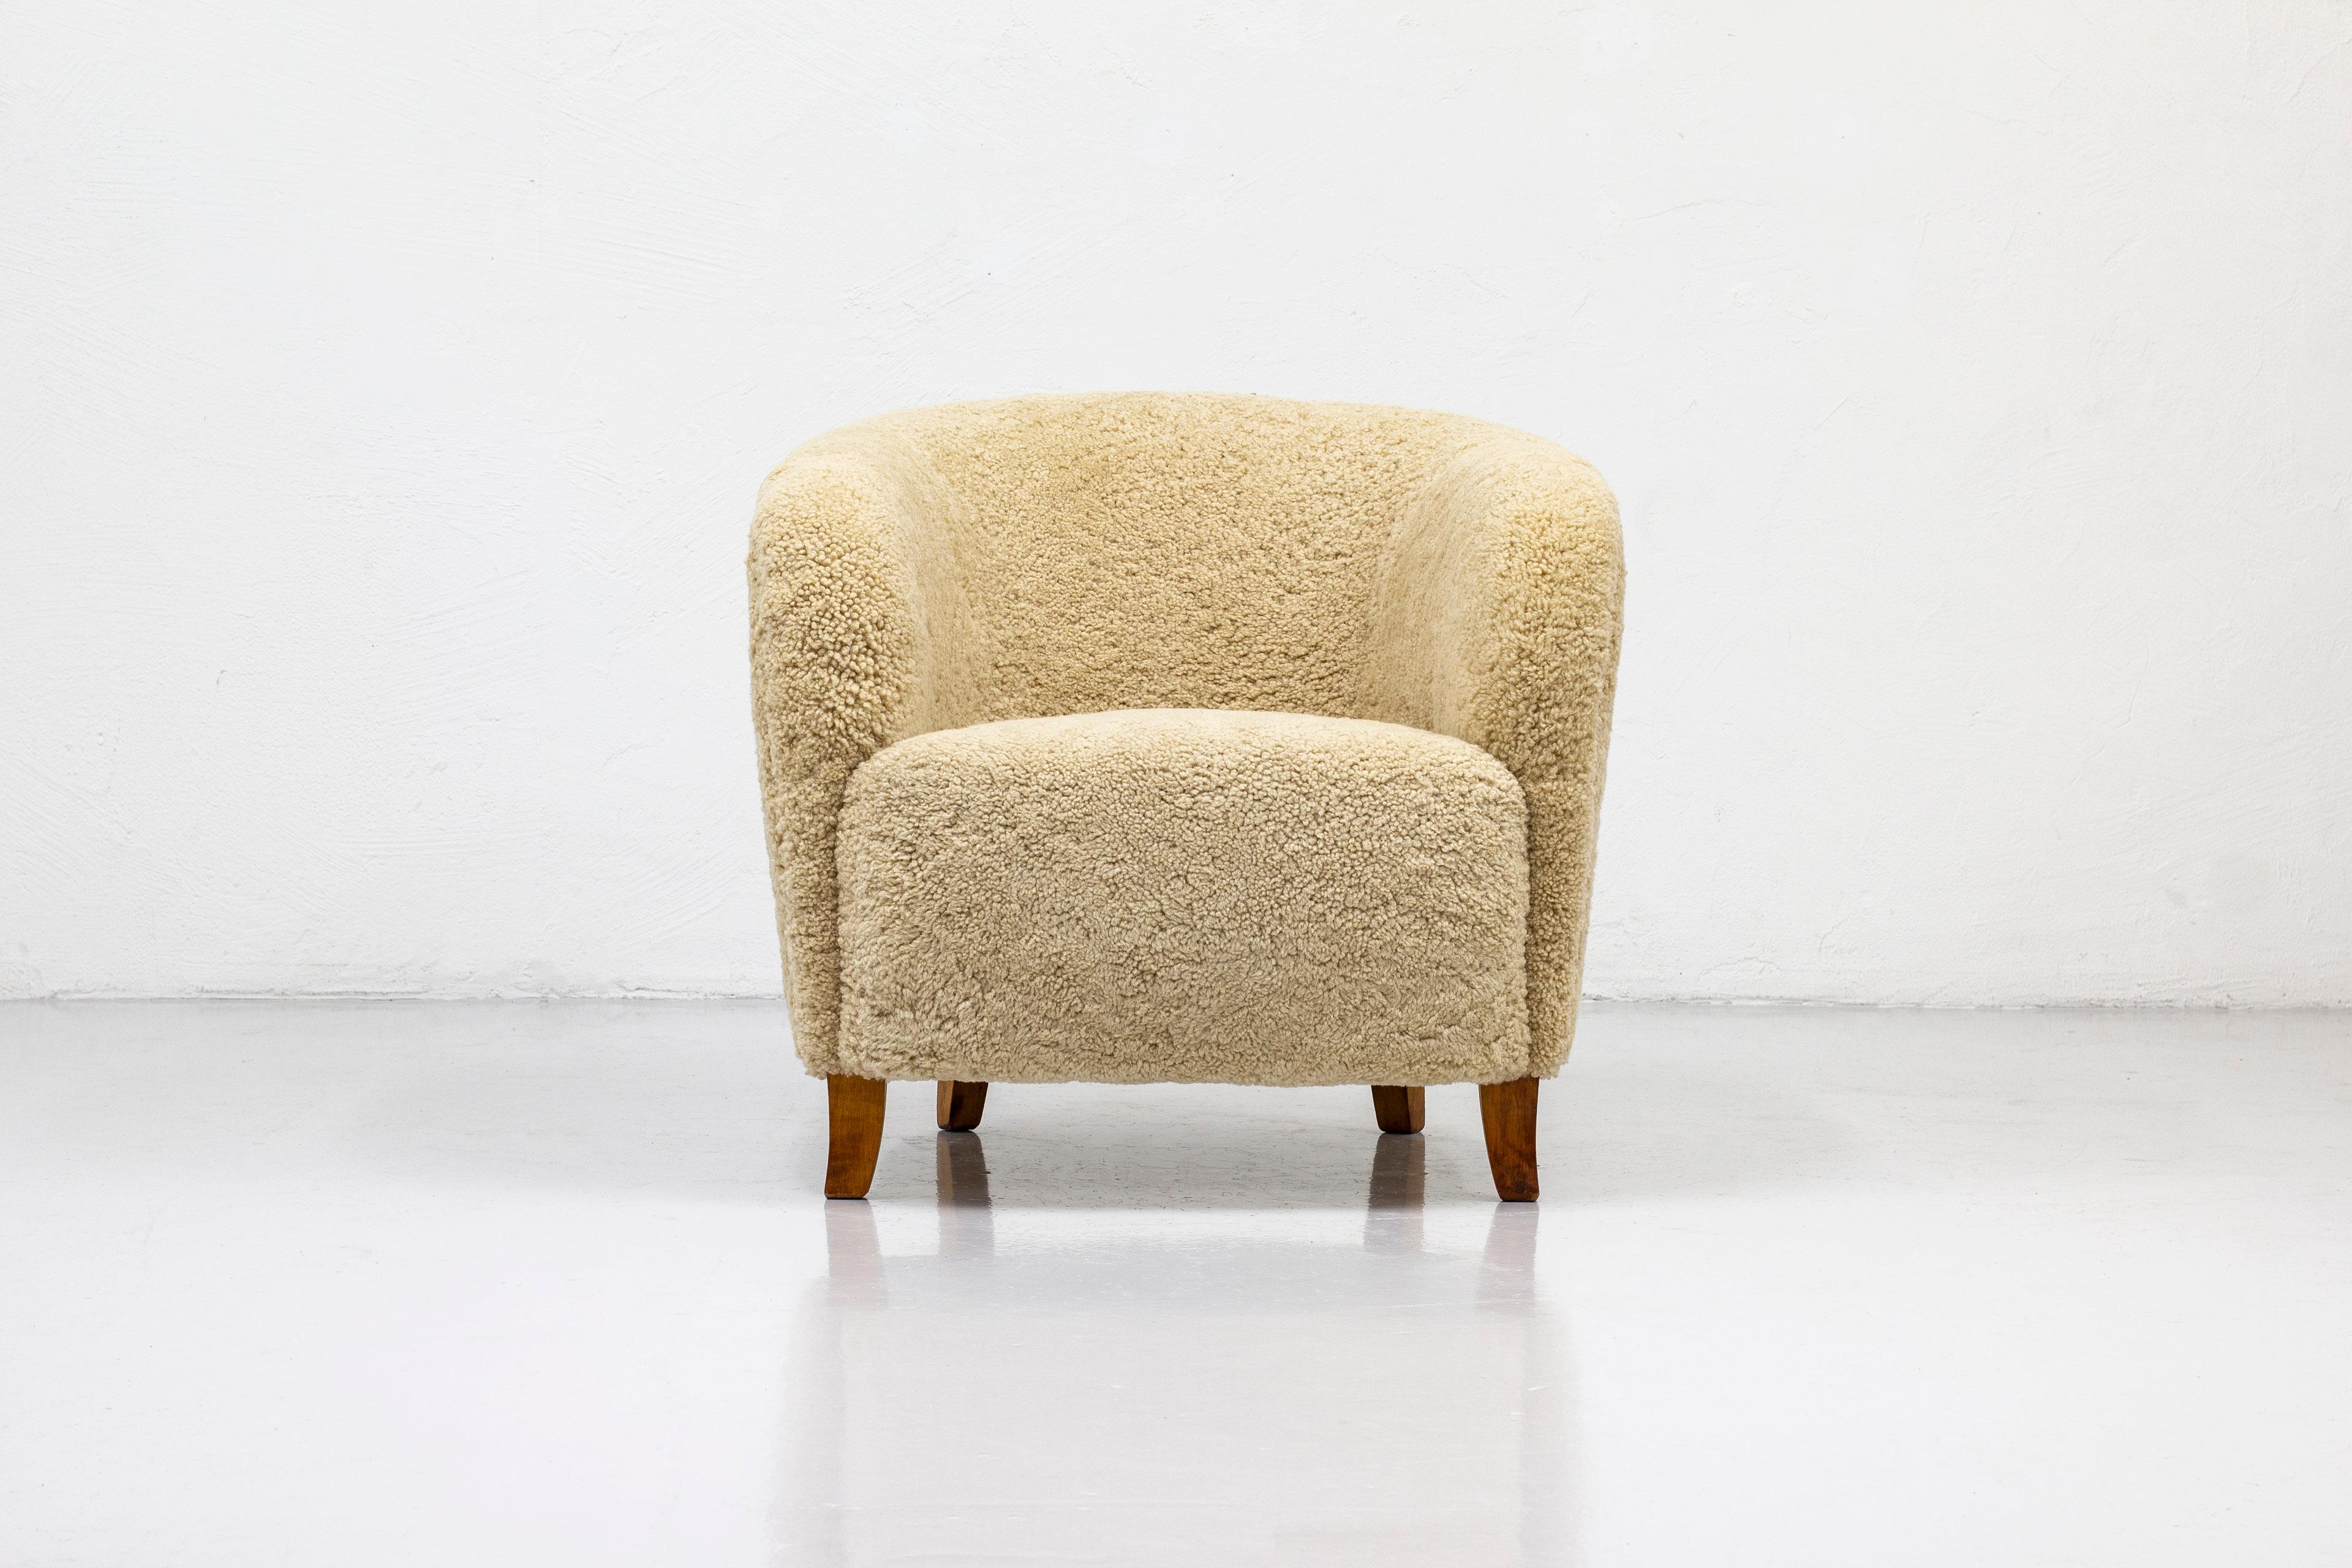 Mid-20th Century Organic Swedish Modern Lounge Chair with Sheepskin Upholstery, Sweden, 1940s